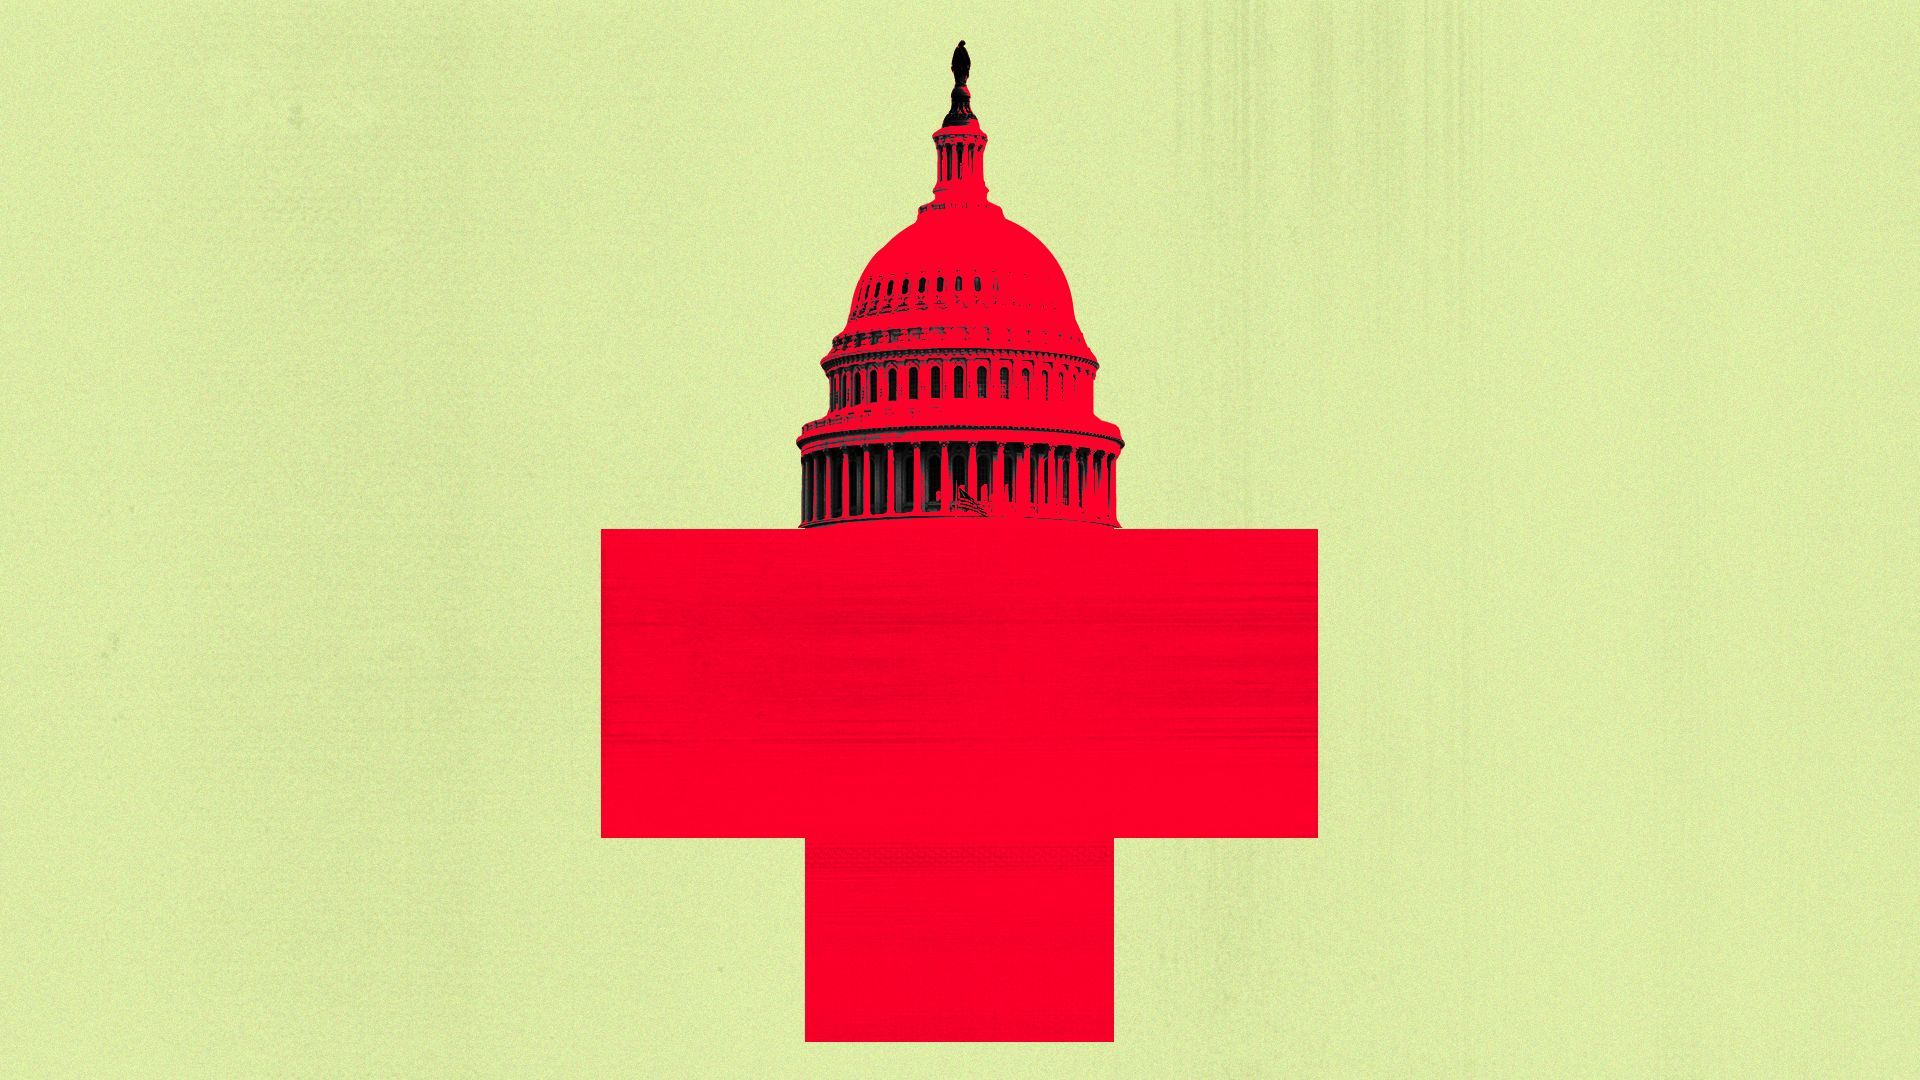 Illustration of the US Capitol forming the top of a red cross symbol.